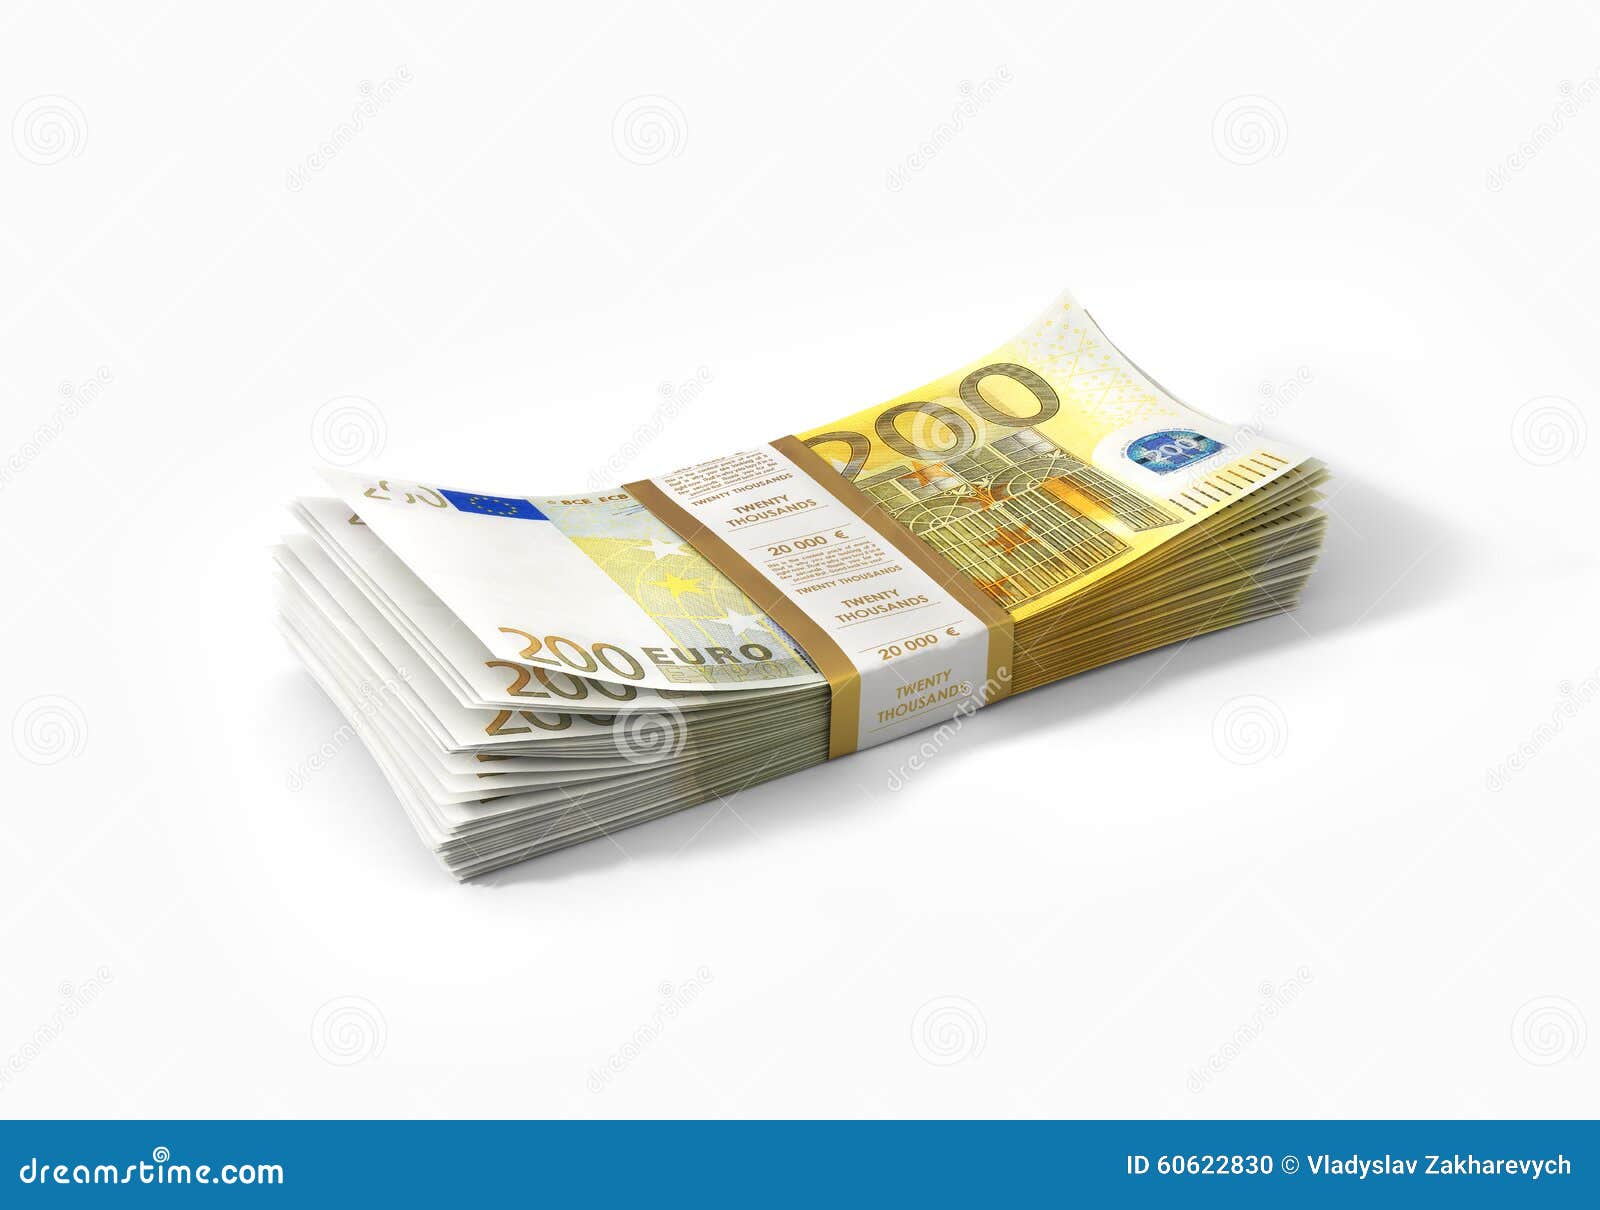 Overname Met opzet formule Stack of 200 Euro Bank Notes Stock Photo - Image of finances, economy:  60622830